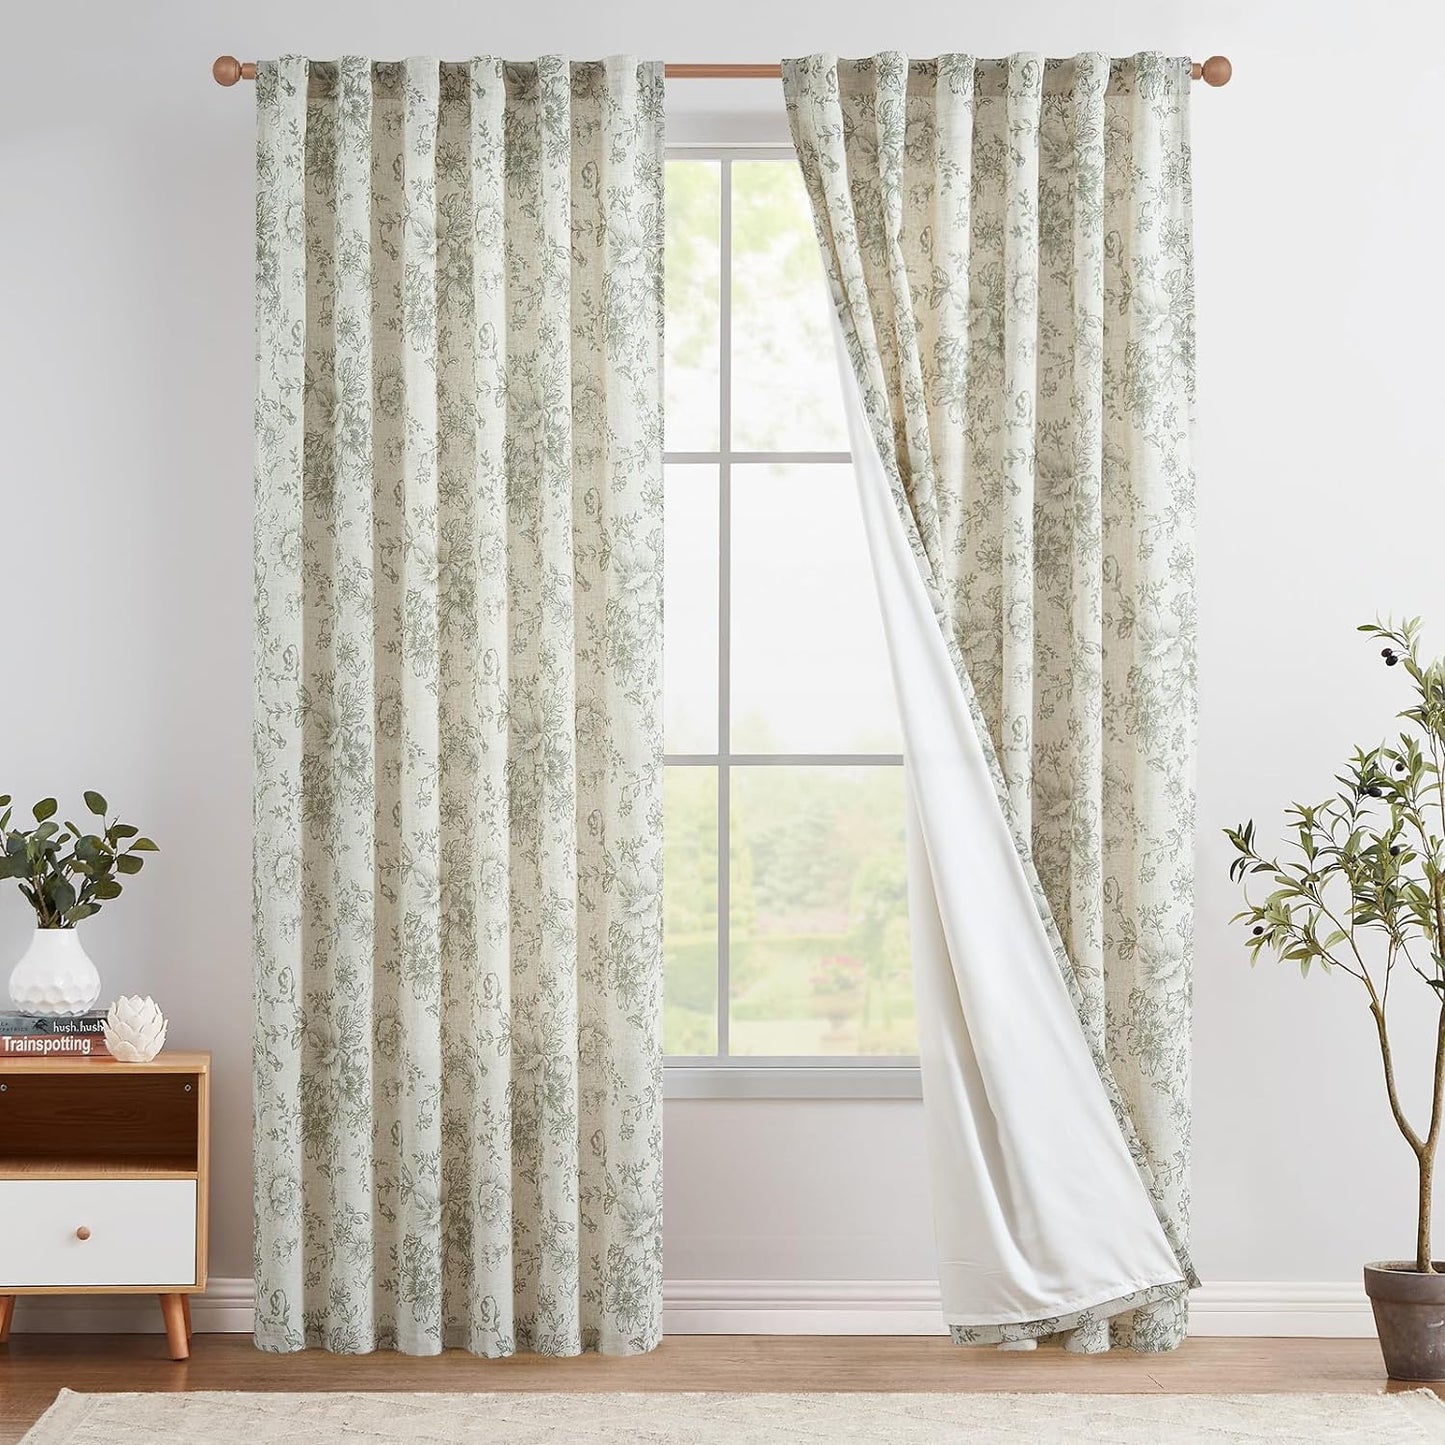 Jinchan Linen Curtains Floral Curtains for Living Room 84 Inch Length Black Printed Curtains Rod Pocket Back Tab Farmhouse Peony Flower Patterned Drapes Bedroom Window Curtain Set 2 Panels  CKNY HOME FASHION Lined Flower Green 50"W X 90"L 